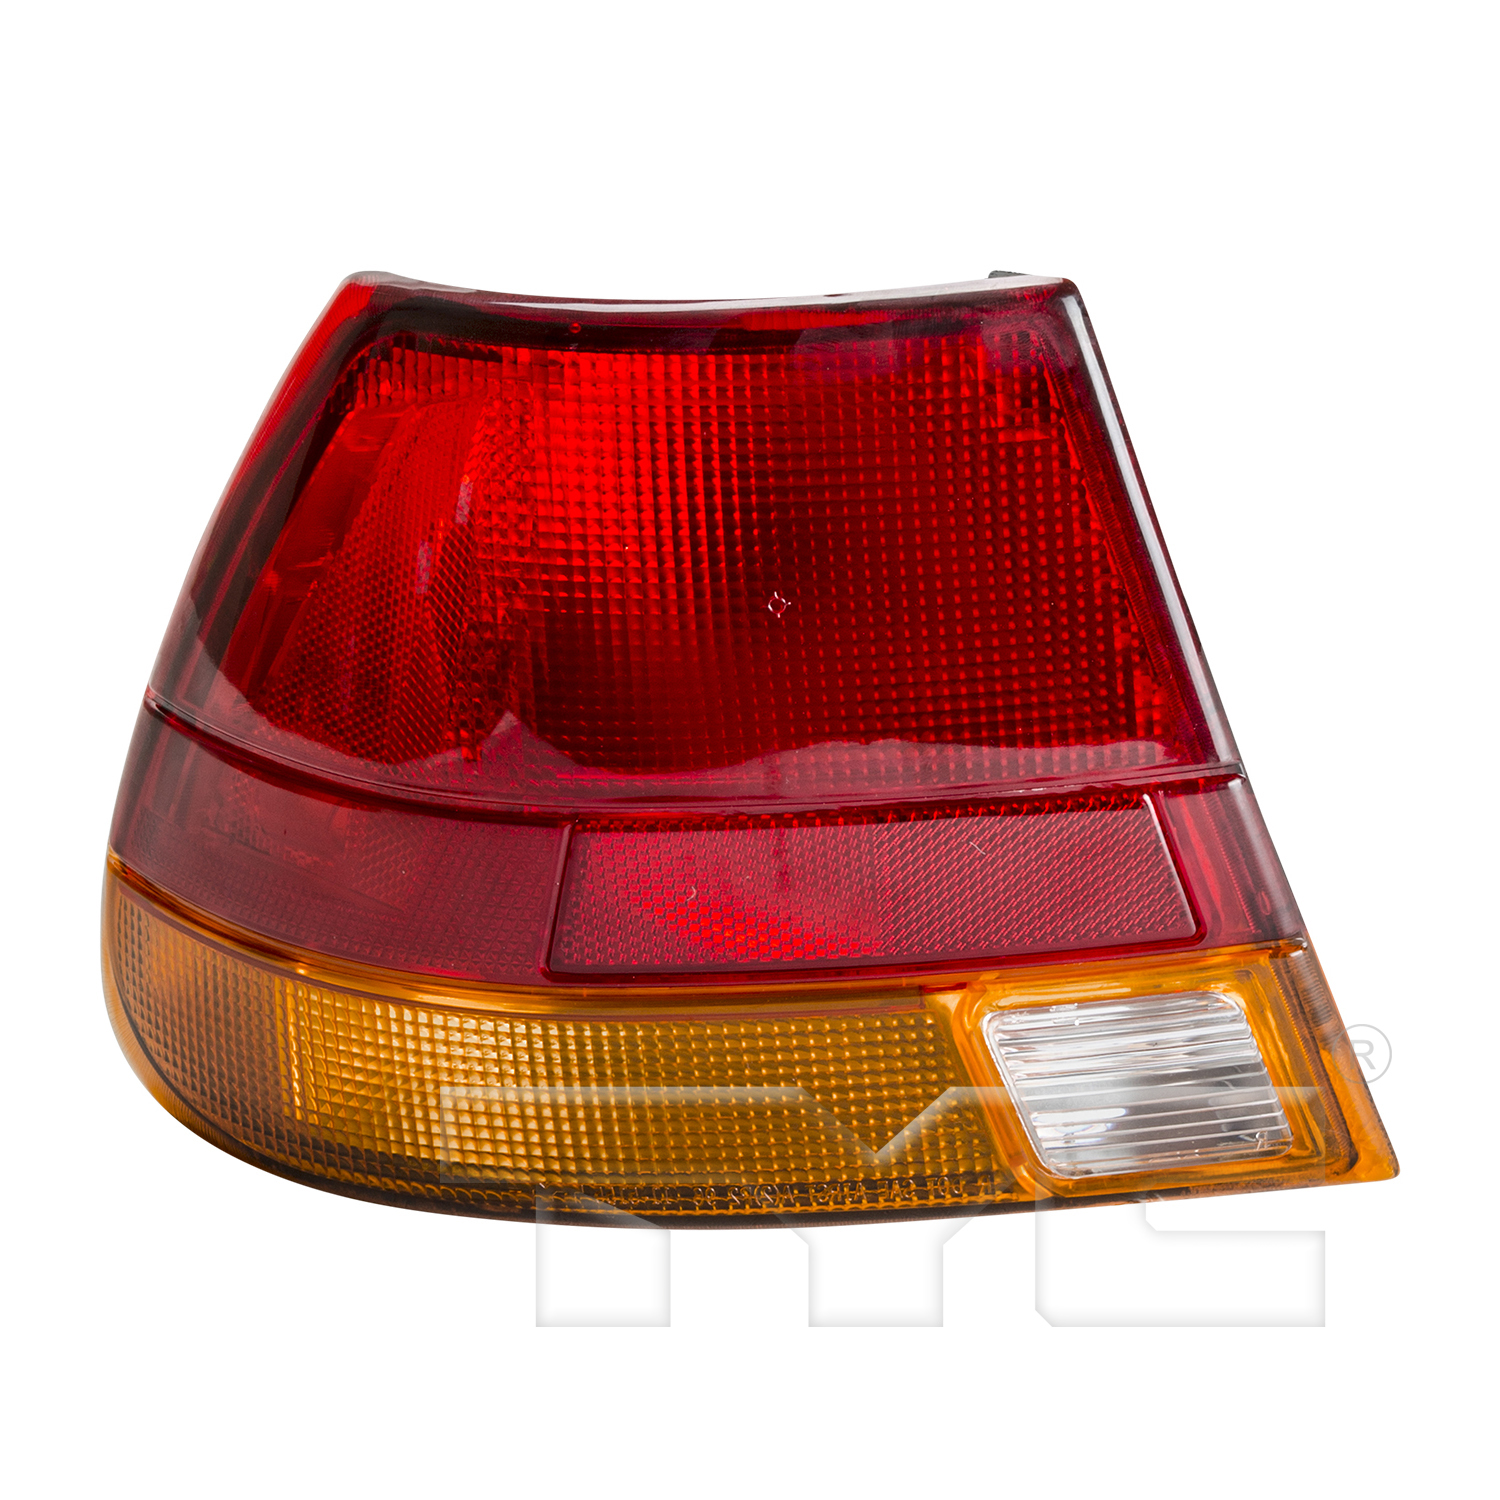 Aftermarket TAILLIGHTS for SATURN - SL1, SL1,97-99,LT Taillamp lens/housing